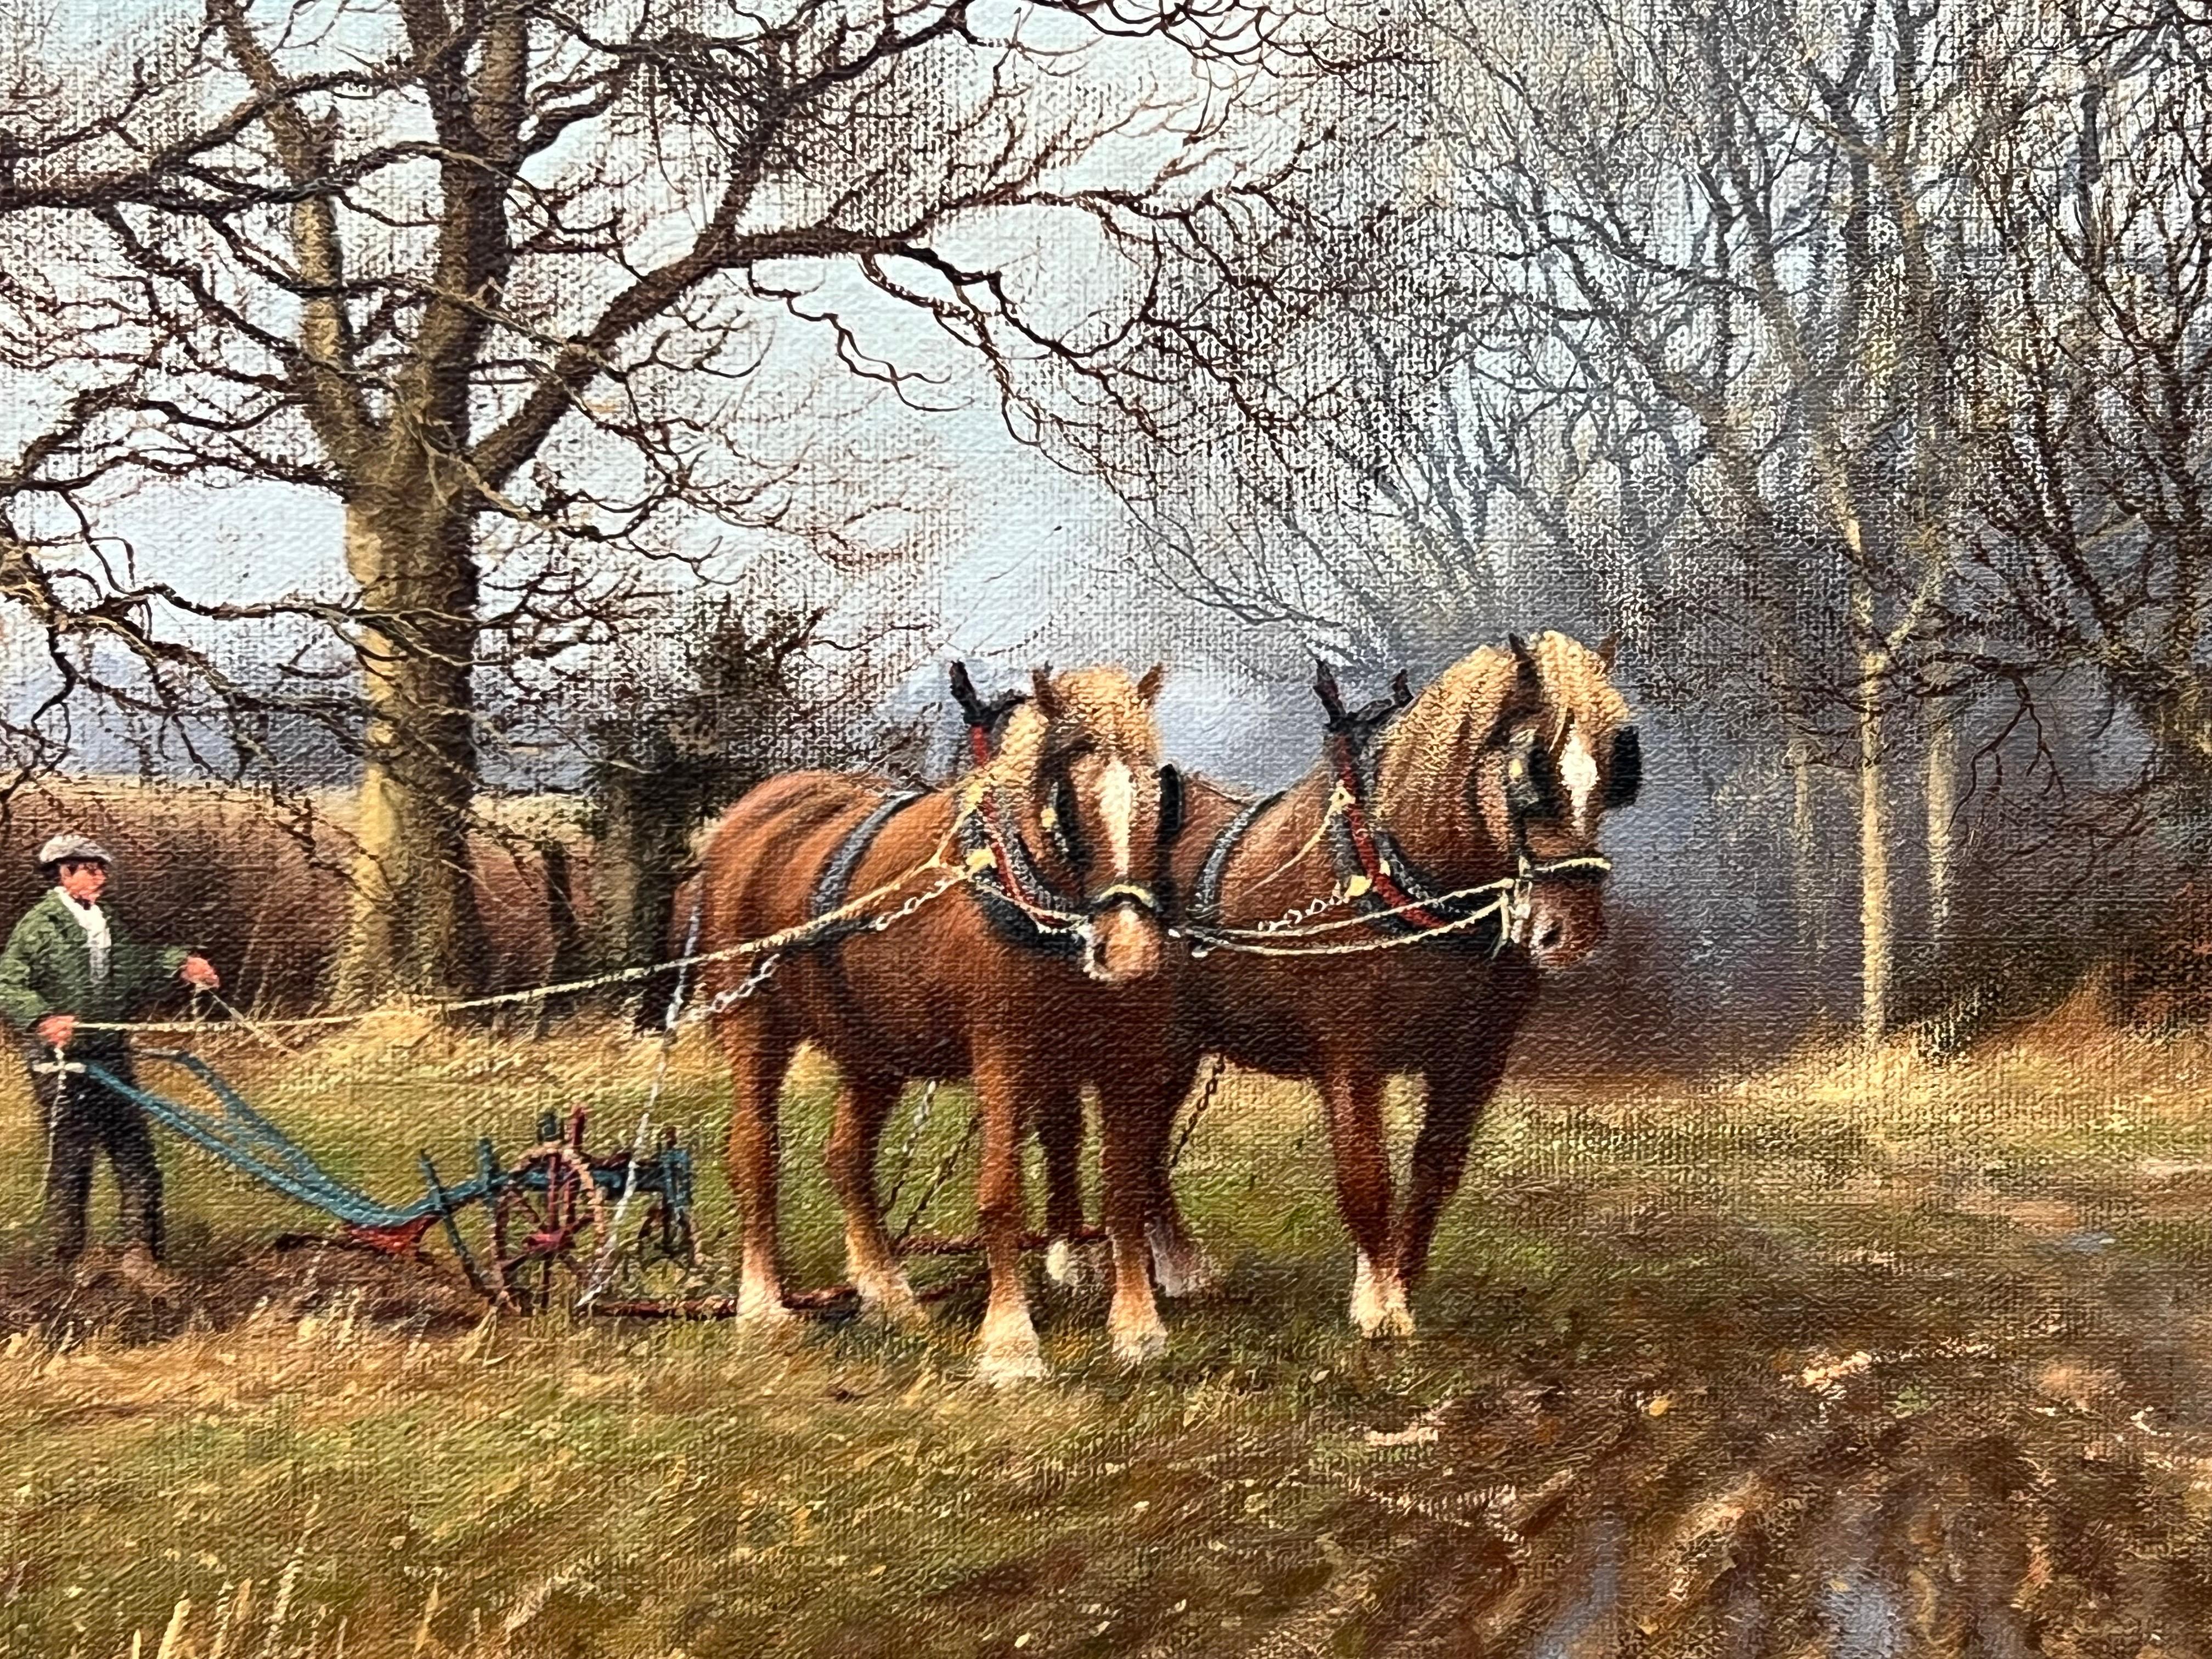 English Countryside & Trees with Horses Pulling Plough by Vintage British Artist For Sale 11